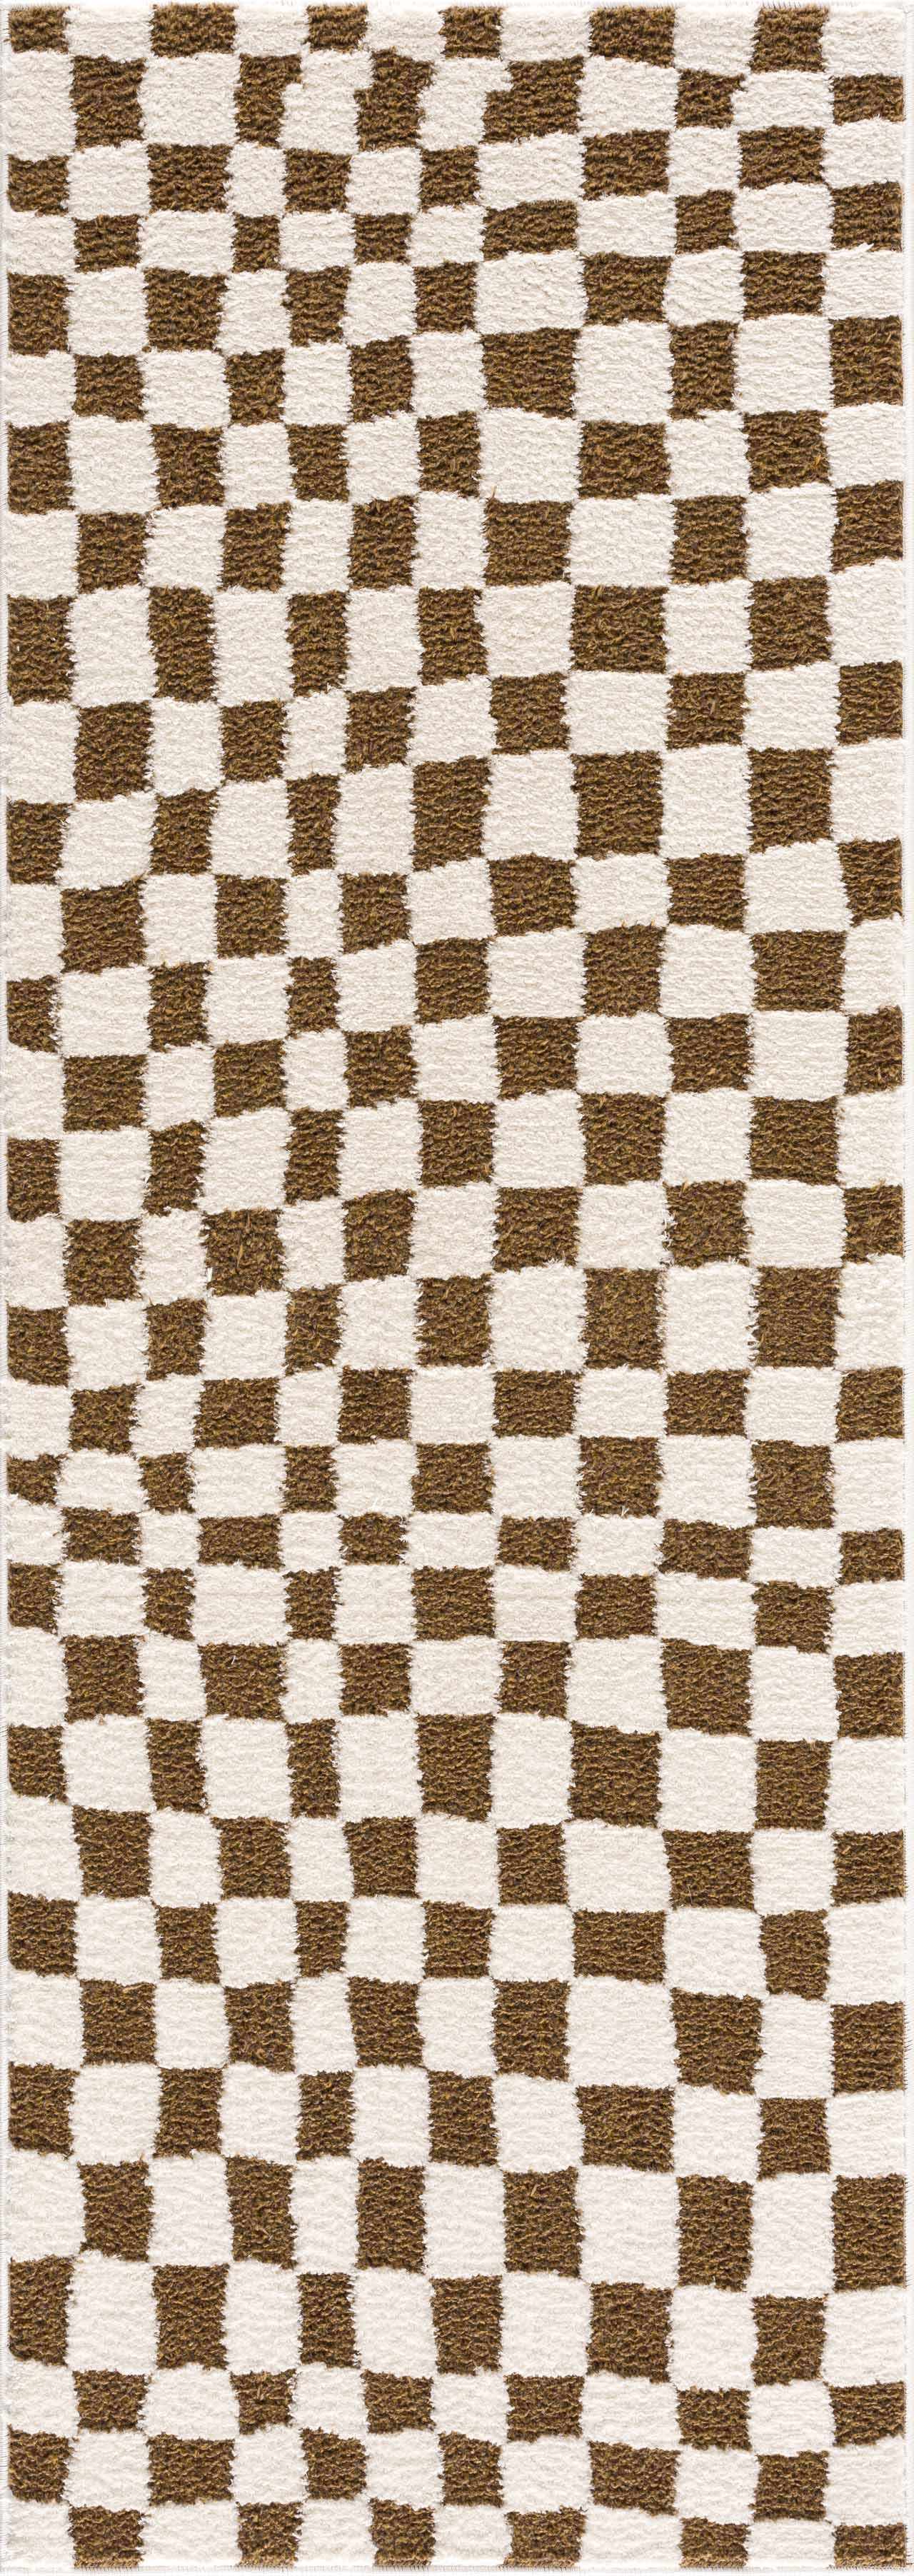 Boutique Rugs Rugs 2'8" x 7'3" Runner Lajos Brown Checkered Area Rug